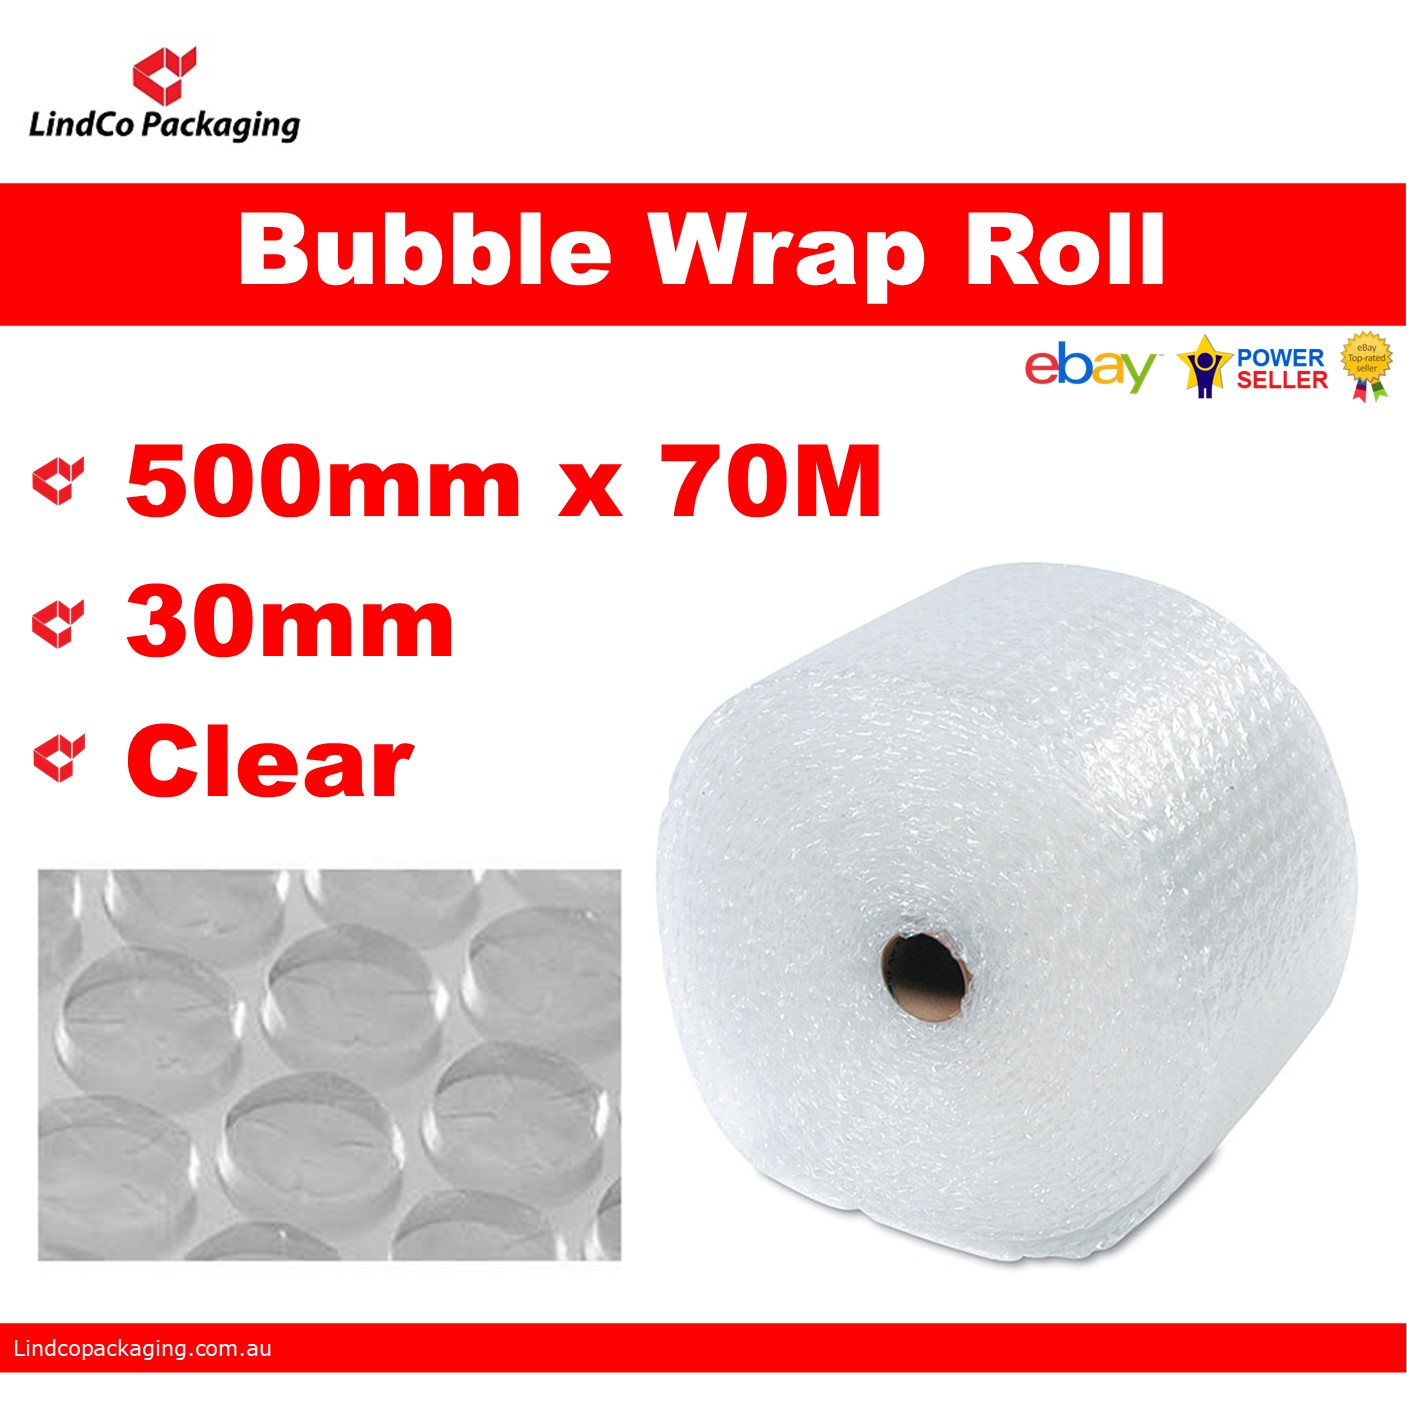 Bubble Wrap 2 ROLLS OF 500mm x 100 M Small Bubble-New! 